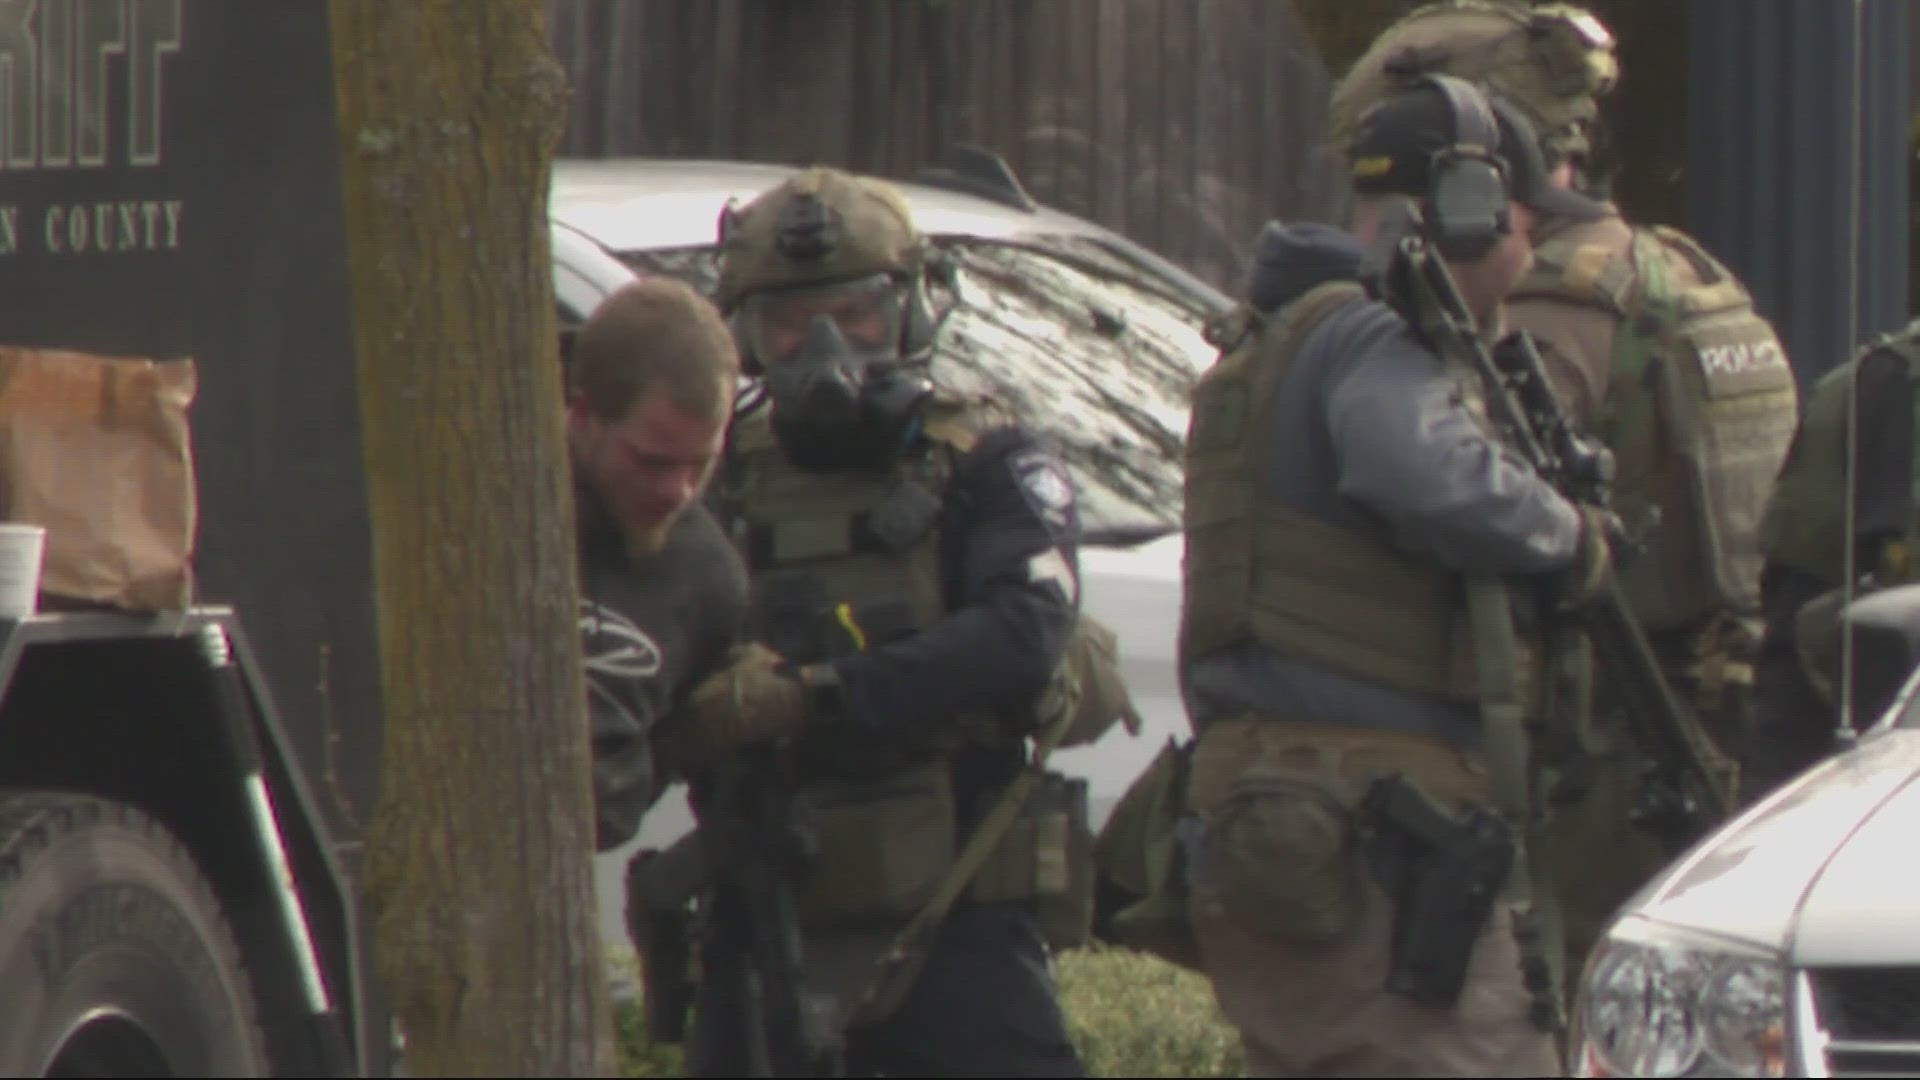 The Washington County Sheriff's Office said the suspect behind the 6-hour standoff had a warrant out for felony probation violation.